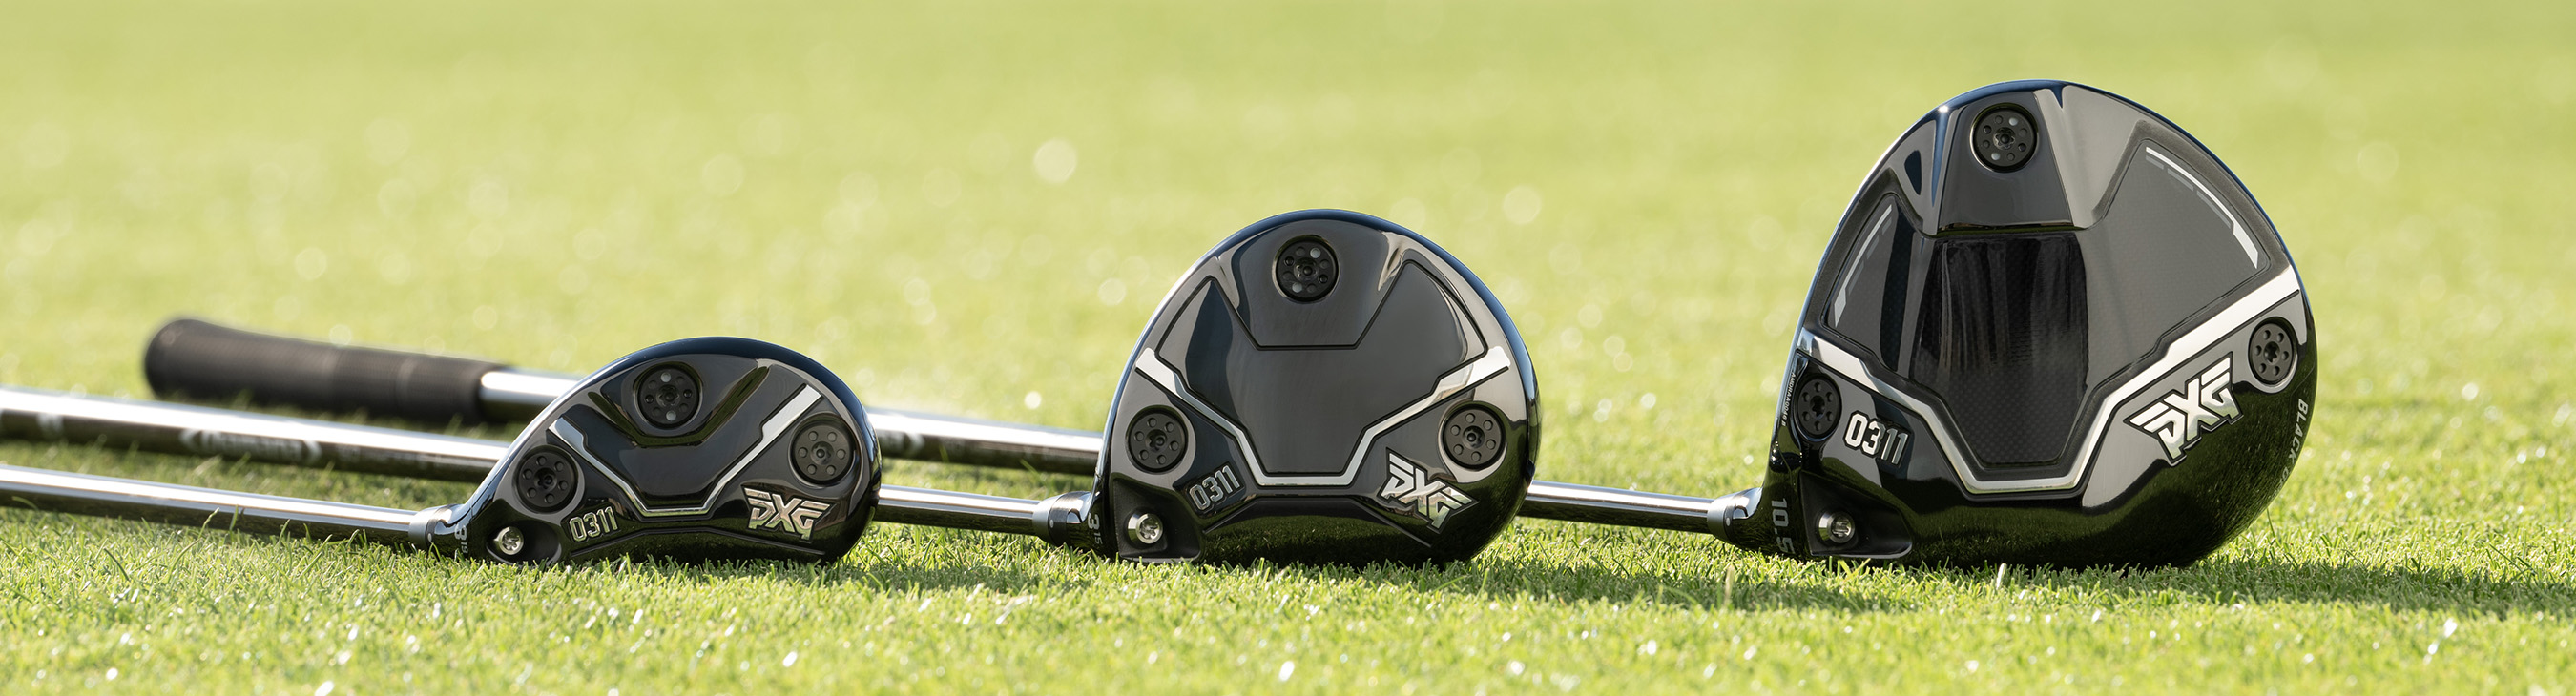 PXG 0311 Black Ops drivers, fairway woods, hybrids: What you need to ...